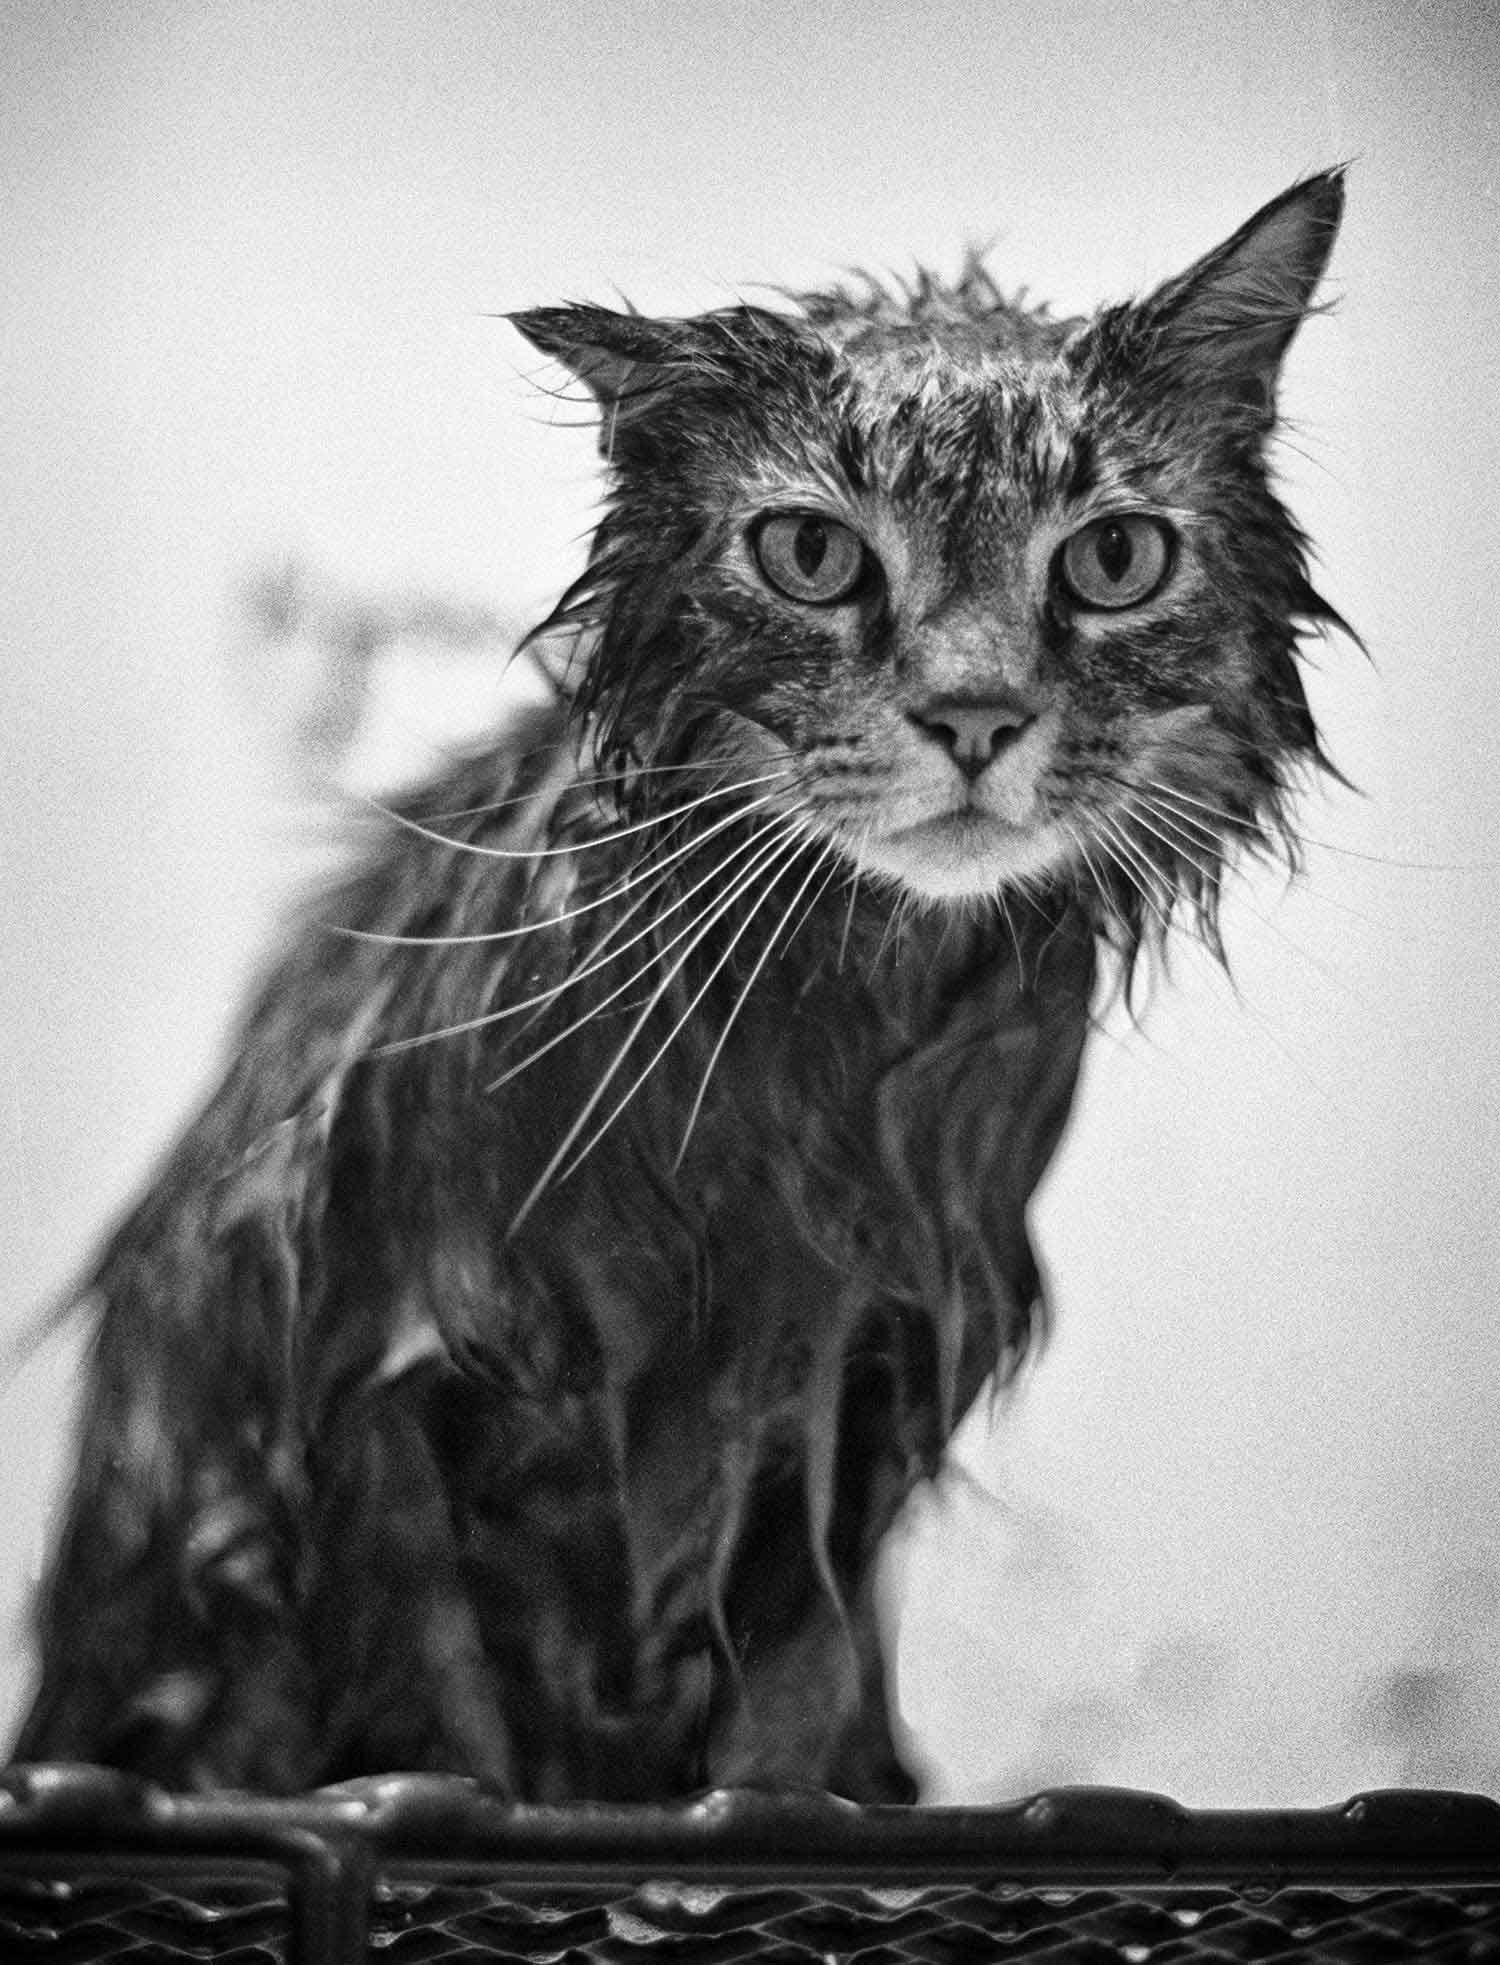 A freshly bathed cat waits patiently to be groomed at LaFollette’s World of Pets Saturday afternoon. photo by Matt Emigh - 1999